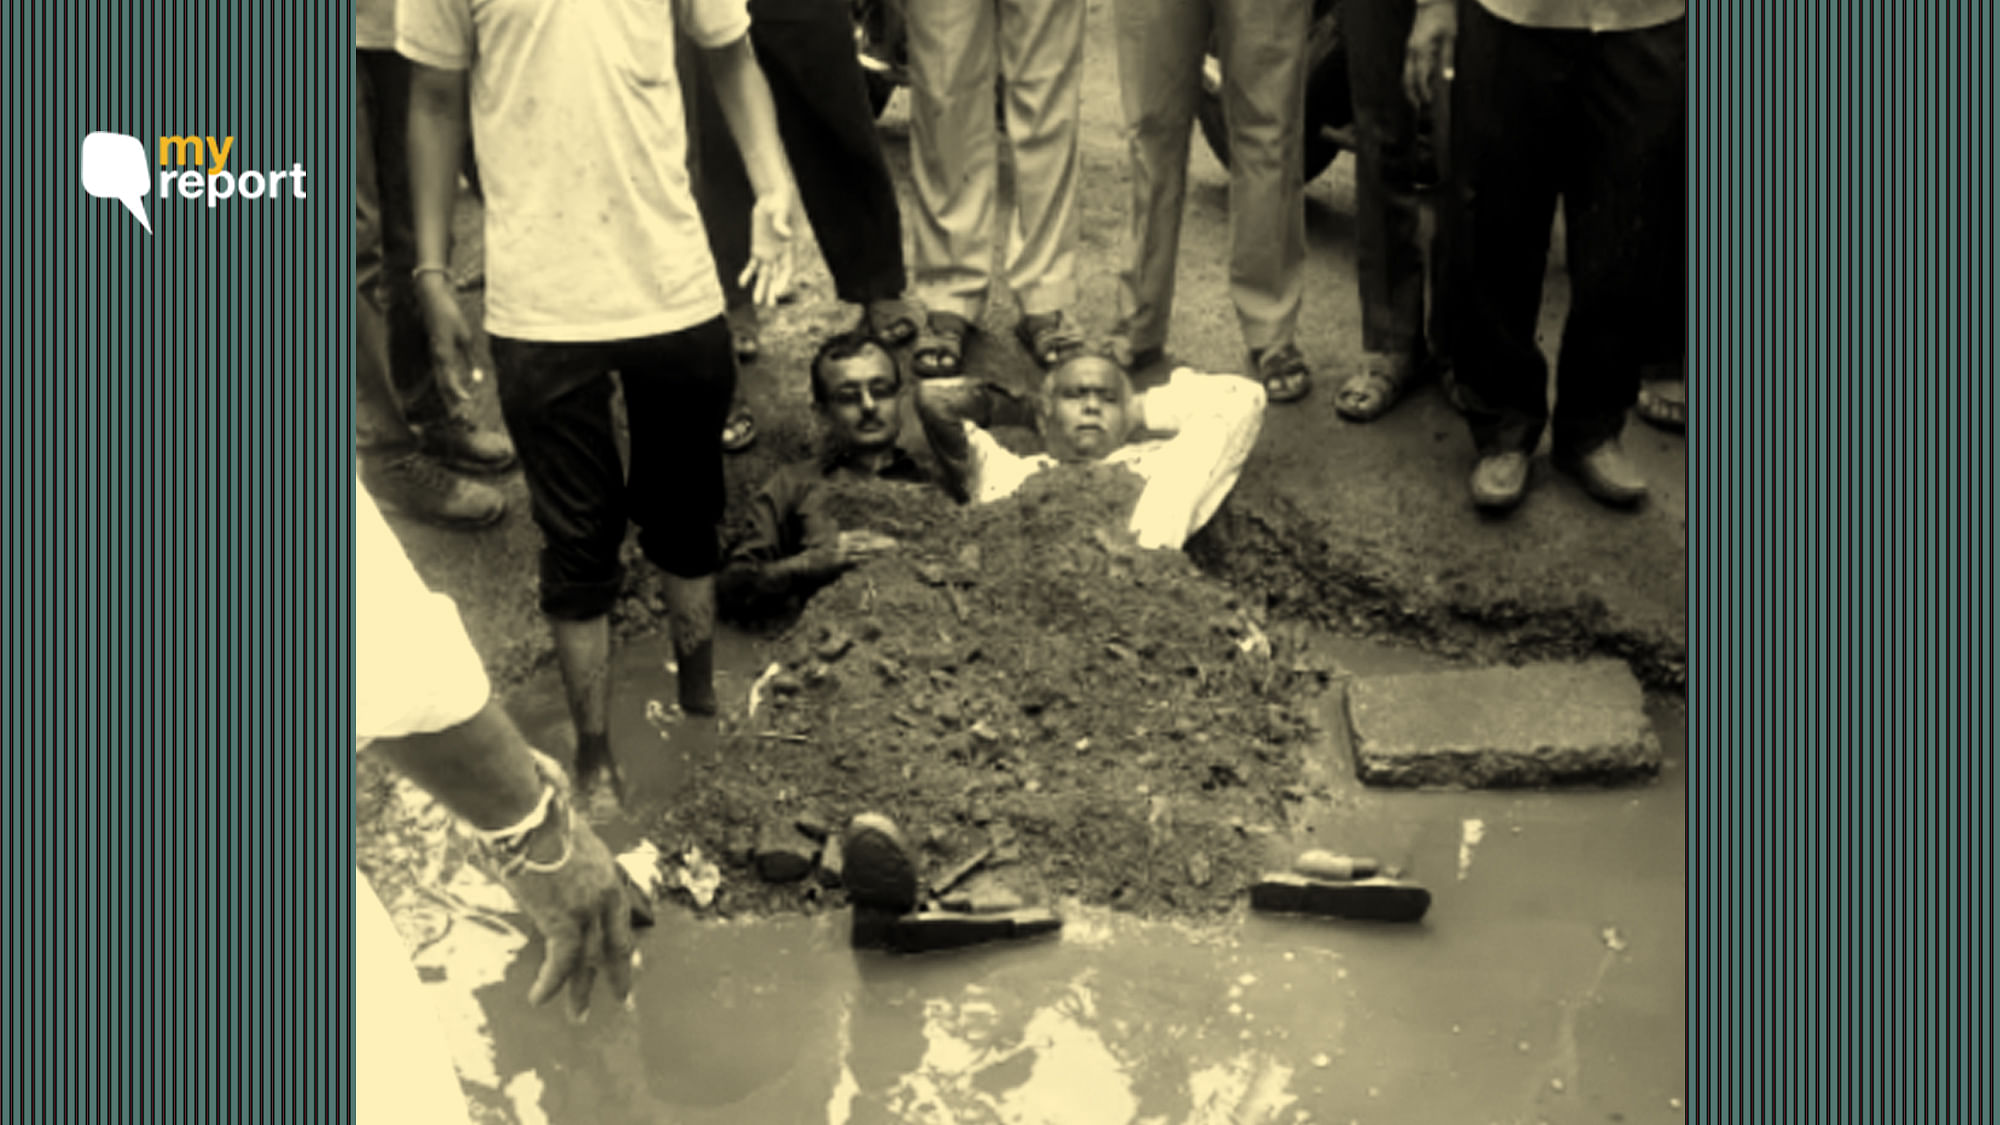  Lakshman Bathwar and his friend buried themselves in a pothole as protest against the condition of the road.